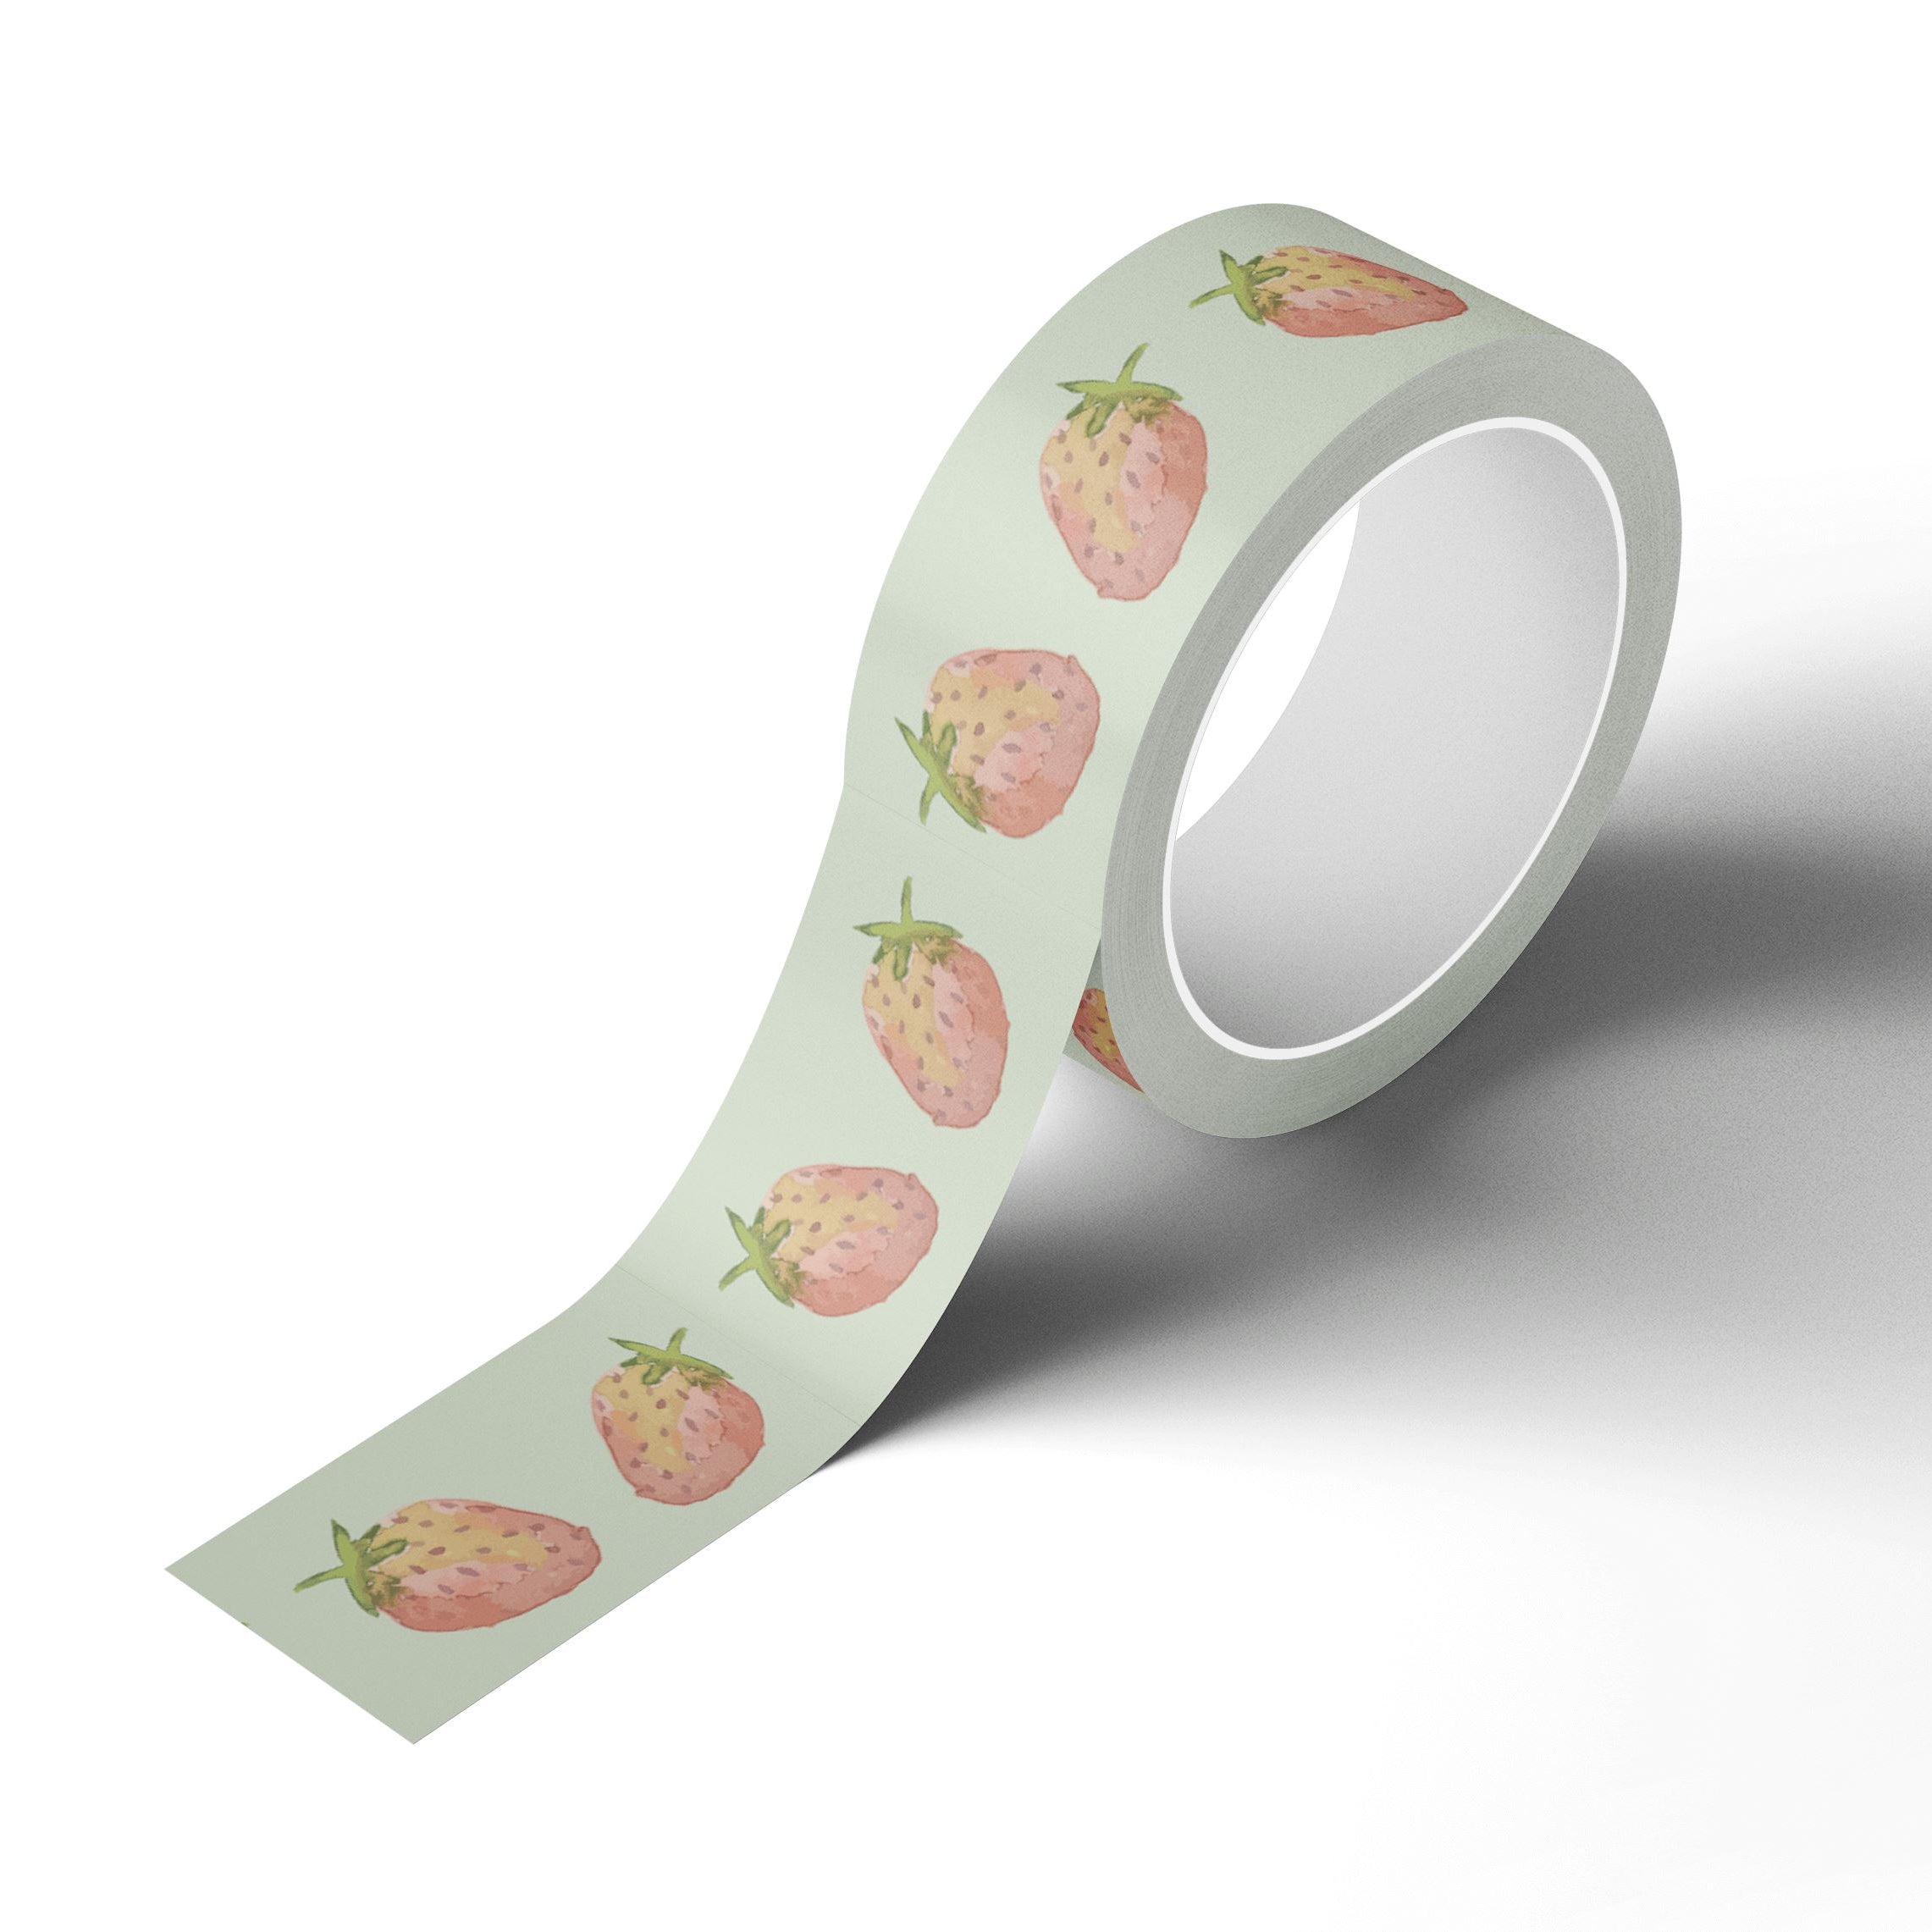 A roll of Japanese rice paper adhesive tape adorned with watercolor painted strawberries on it.